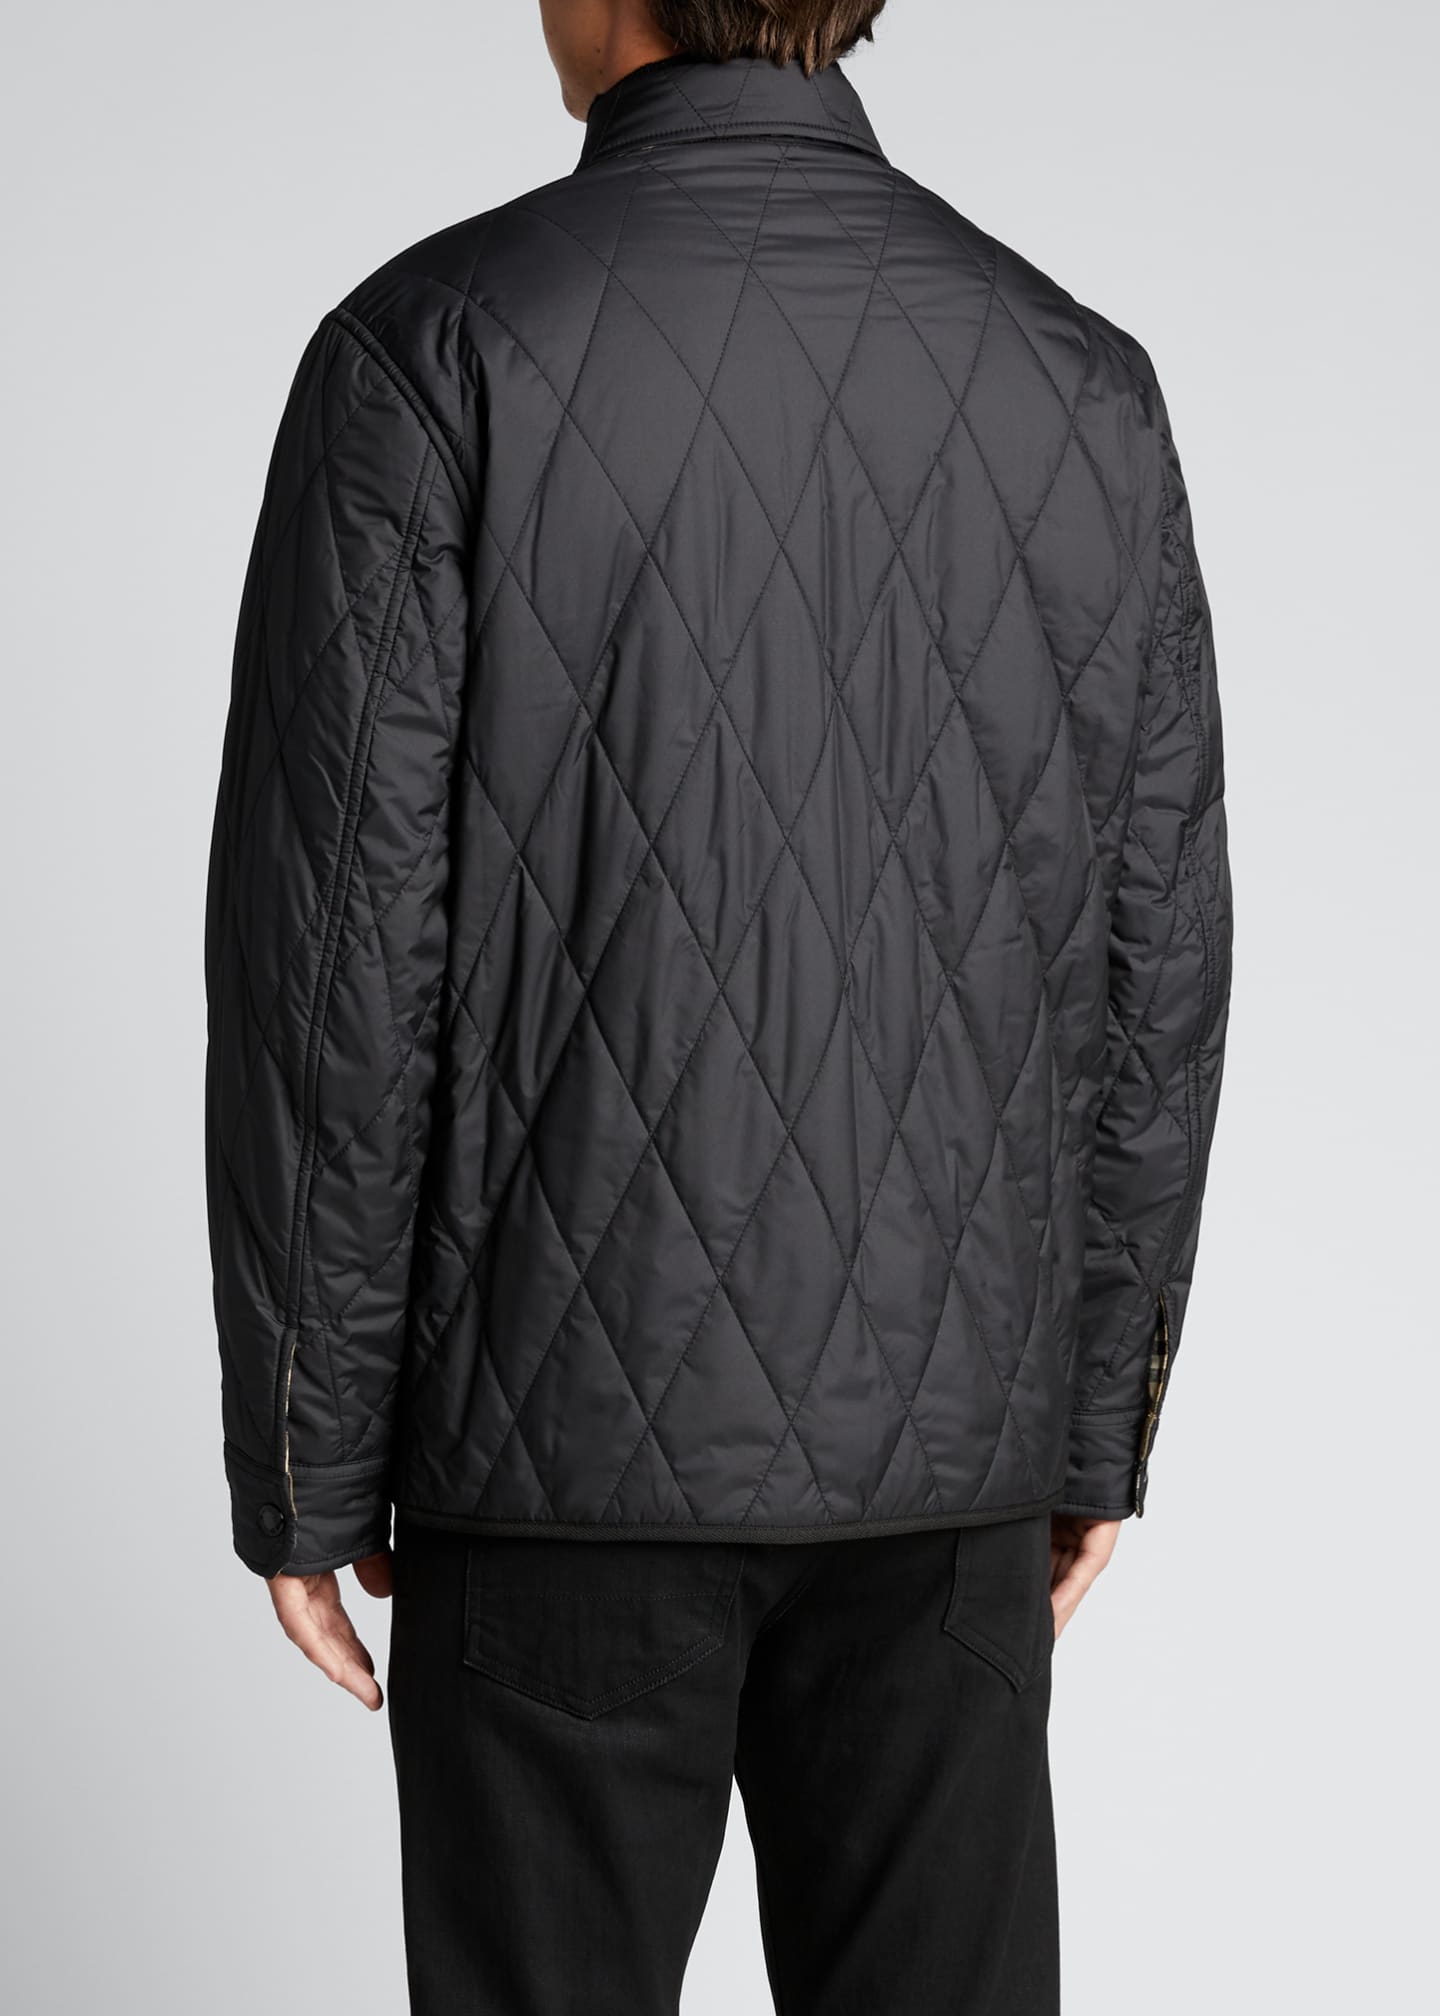 Burberry Men's Cresswell Reversible Diamond Quilted Shirt Jacket